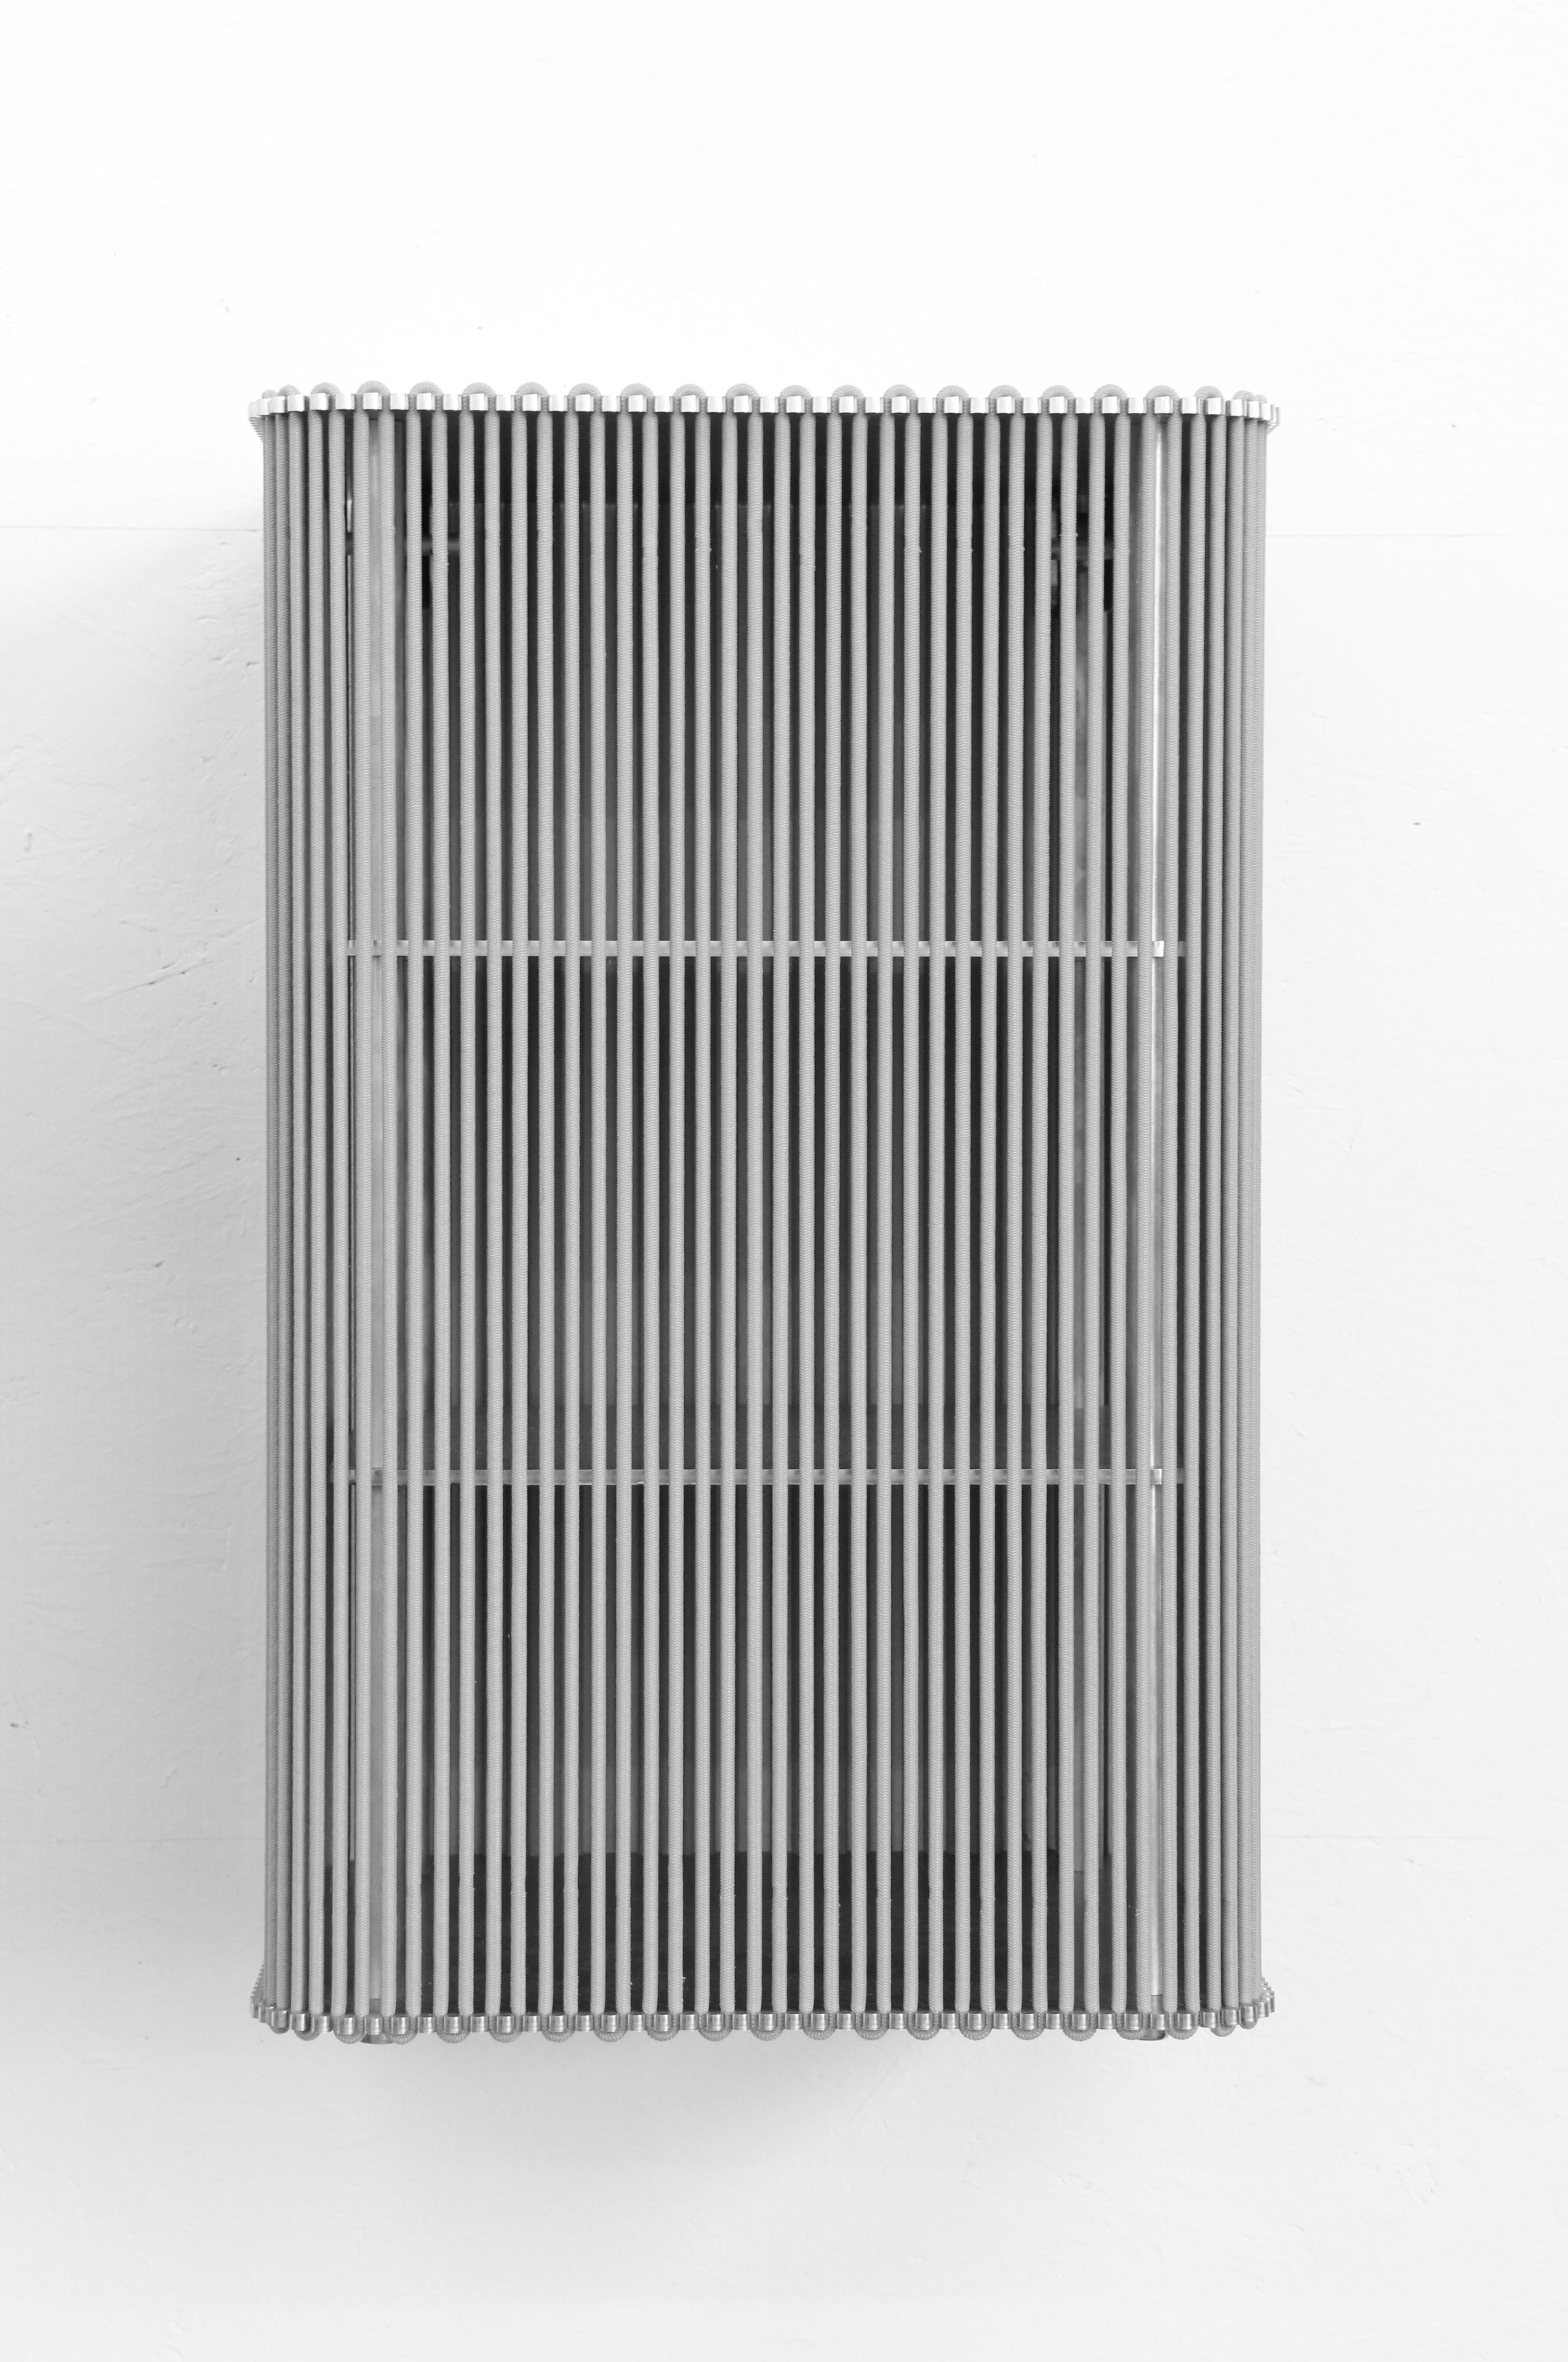 Coil #3 cabinet wall mounted by Bram Kerkhofs
Dimensions: D 80 x W 40 x H 122.4 cm.
Materials: stainless steel, aluminium, elastic rope (natural rubber, polyethylene).

Other dimensions are available. 

Coil is a modular cabinet system in